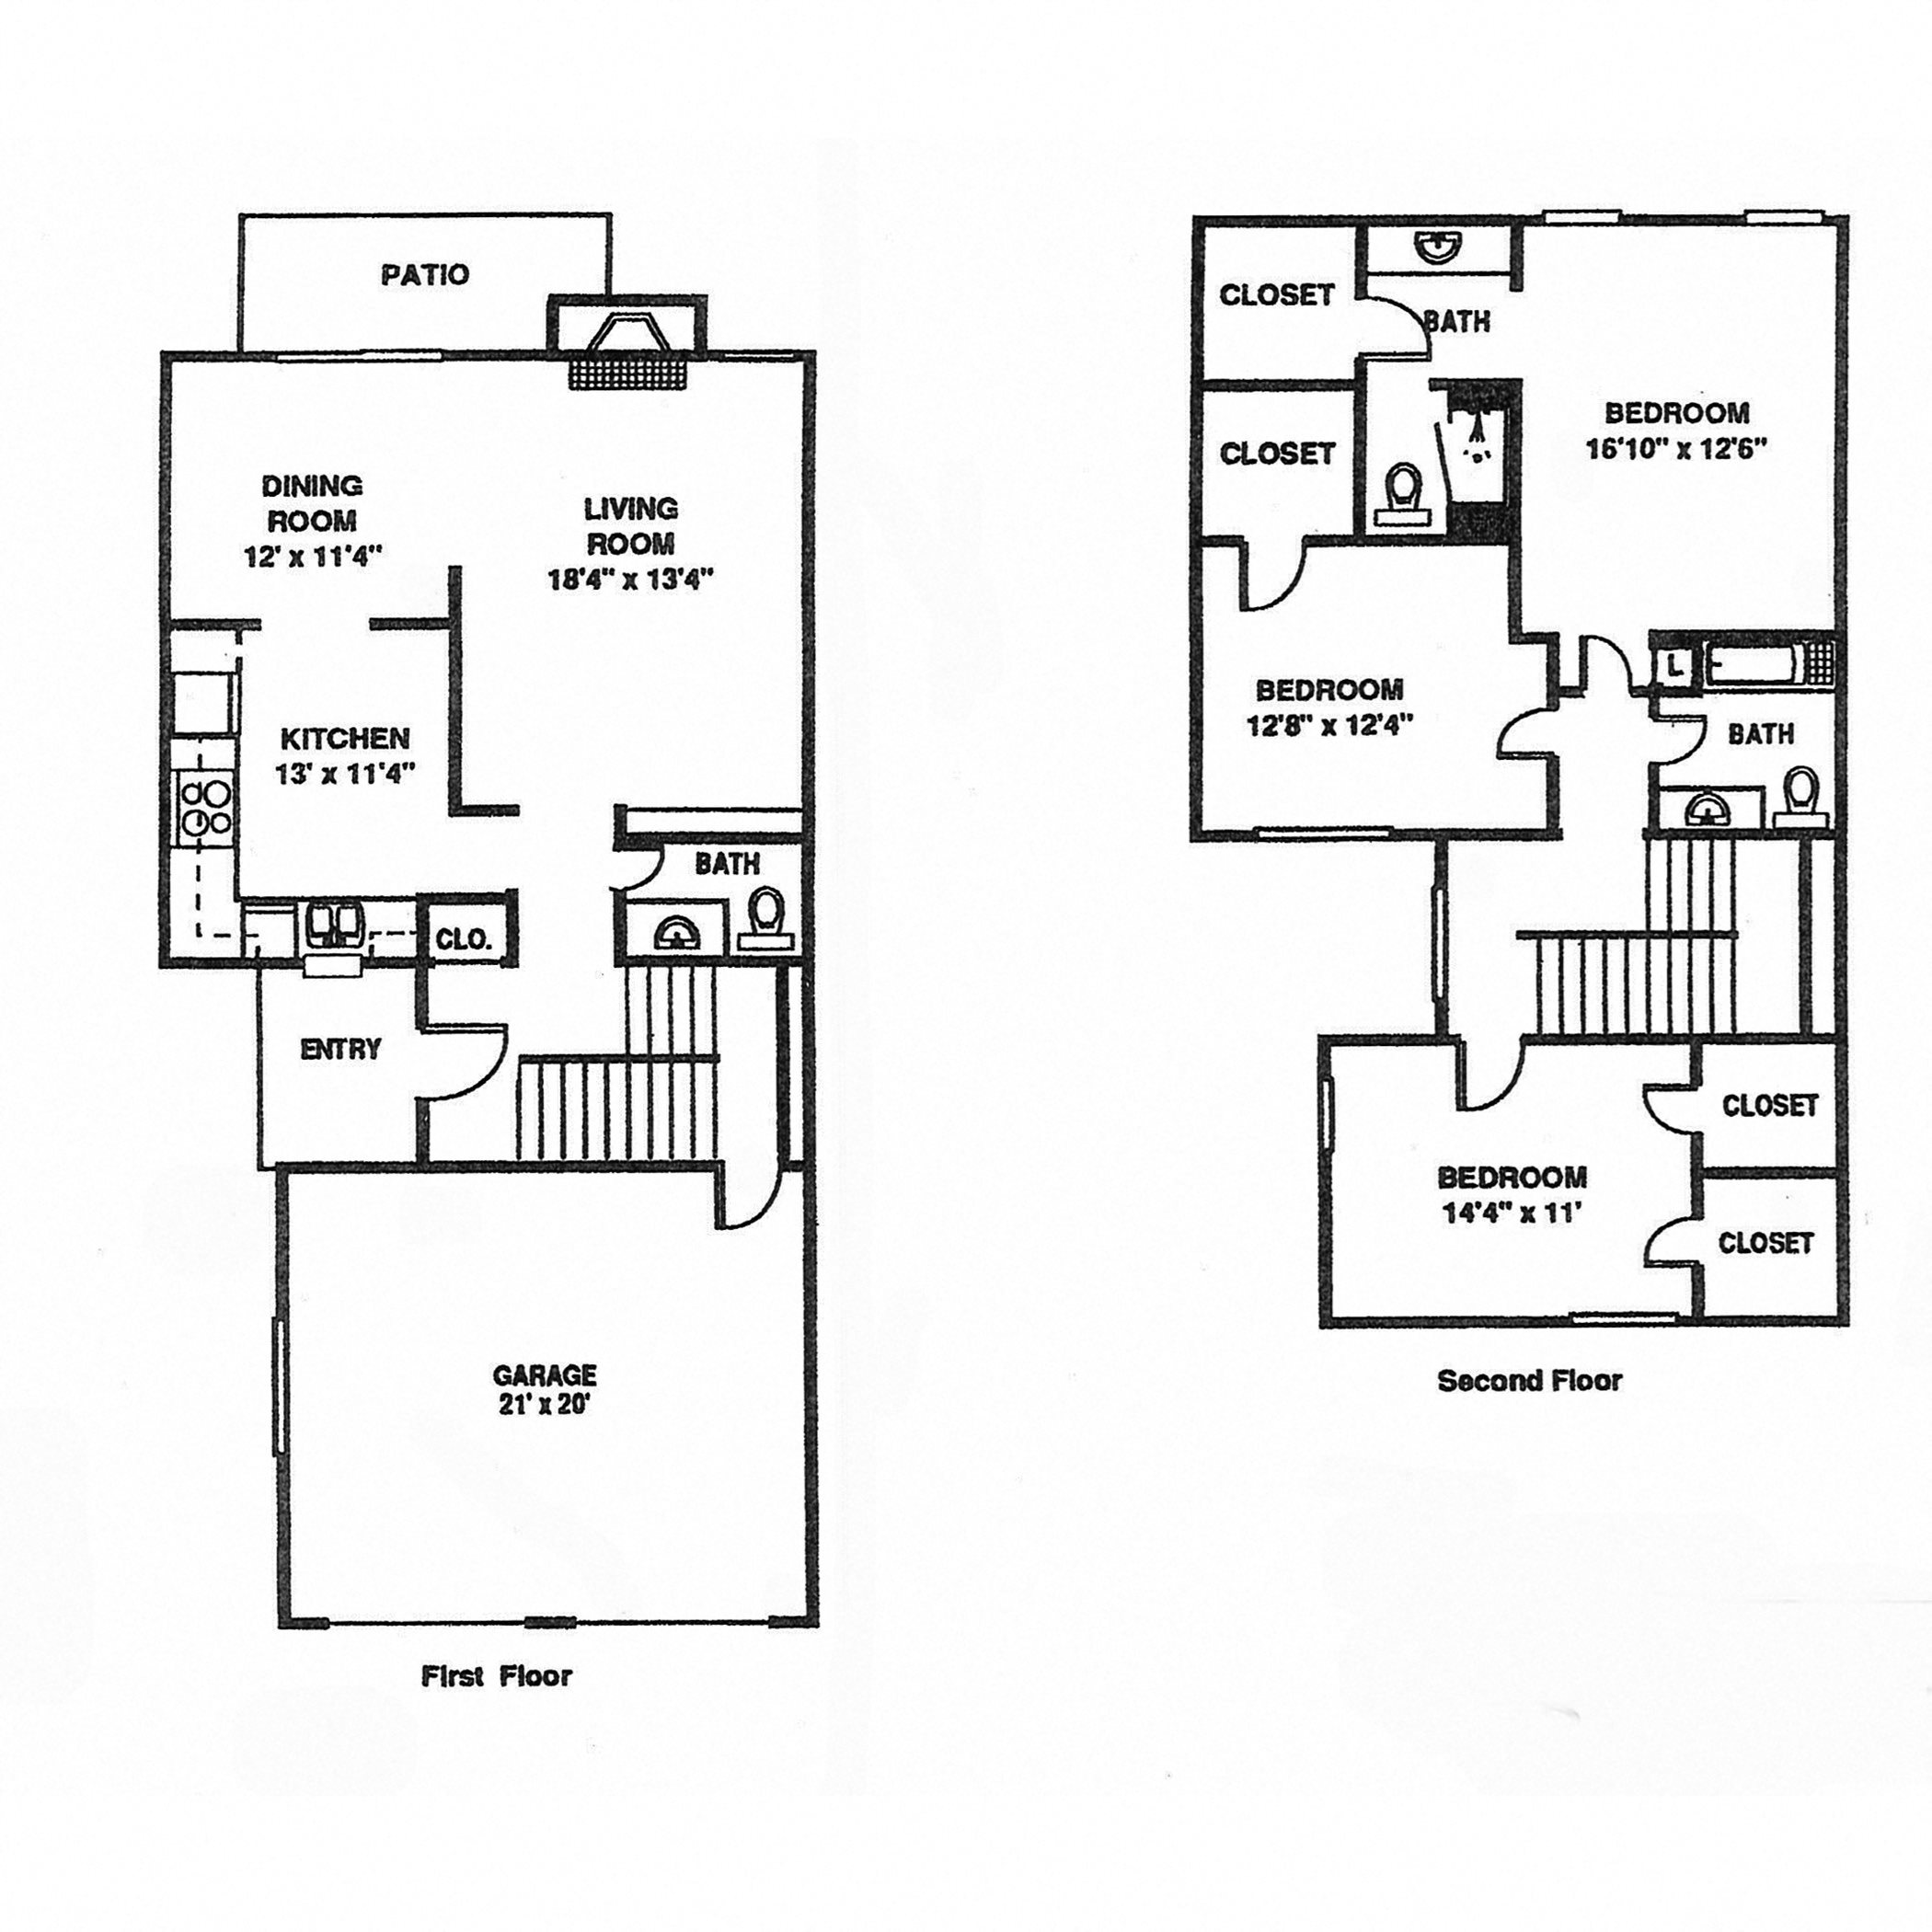 Floor Plans of Willow Creek in Kansas City, MO Over 40